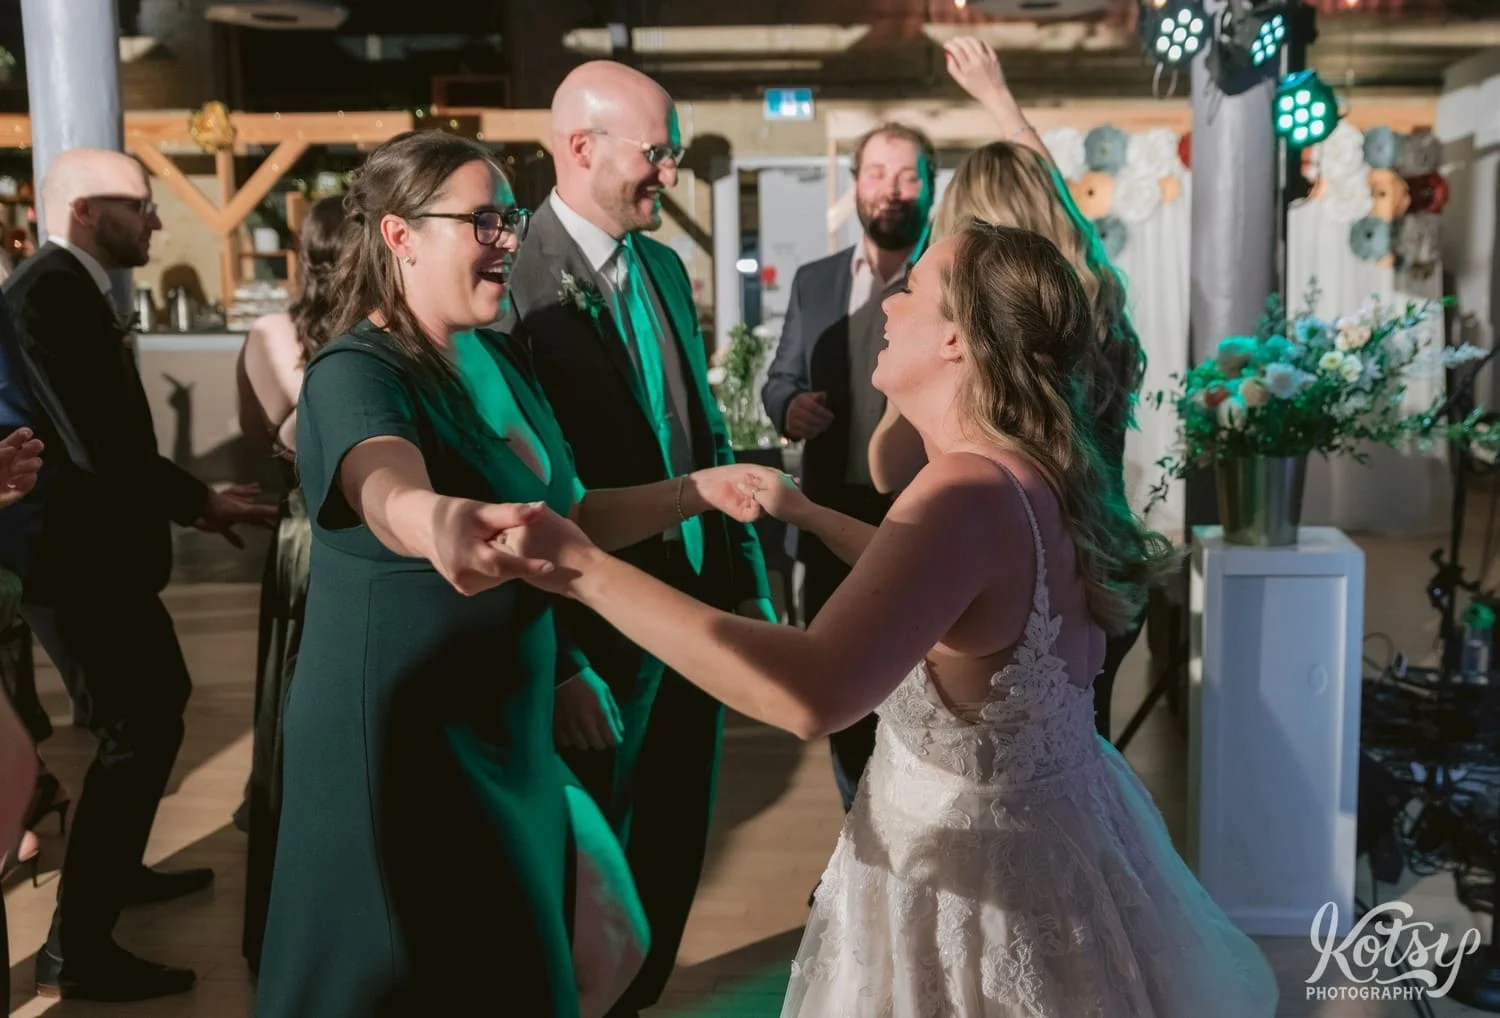 A woman in a green dress and a bride and a white wedding gown dance while holding hands during a Second Floor Events wedding reception in Toronto, Canada.